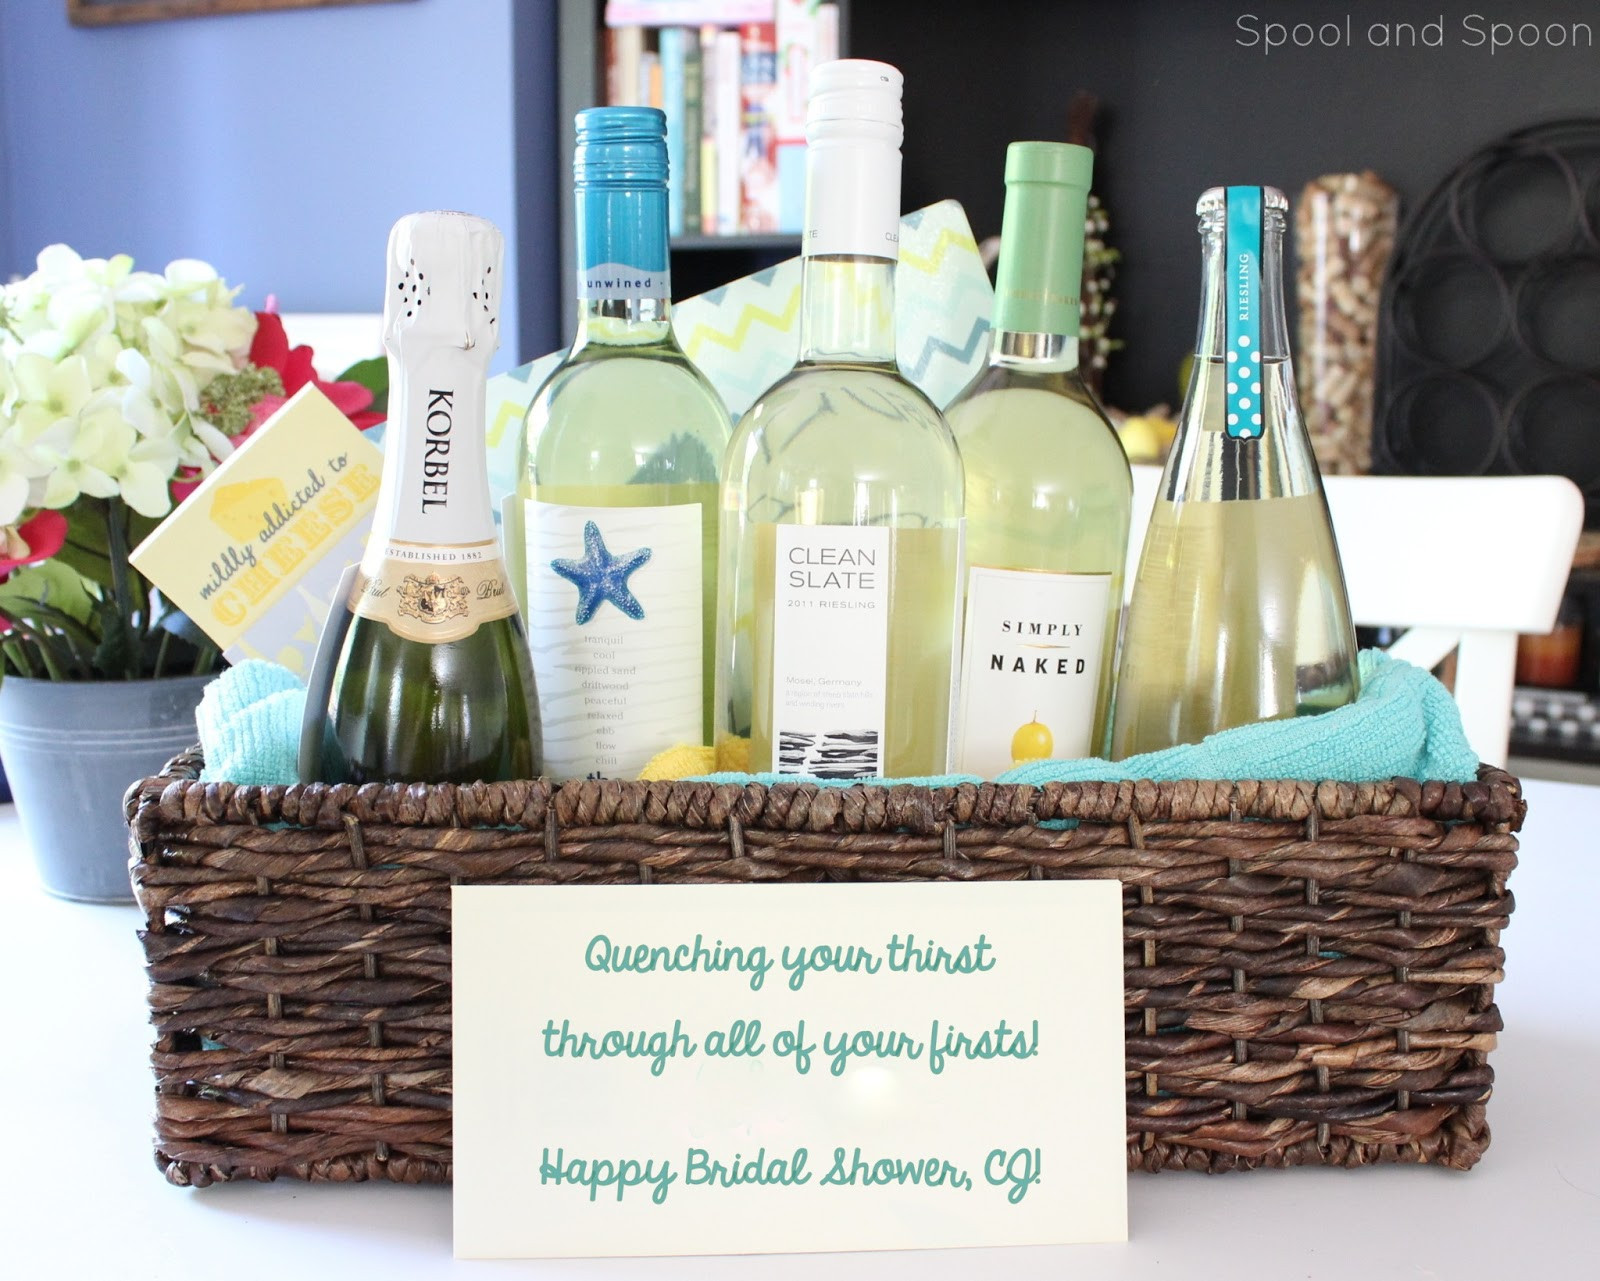 Wine Wedding Gift Ideas
 Spool and Spoon "All of Your Firsts" Wine Gift Basket